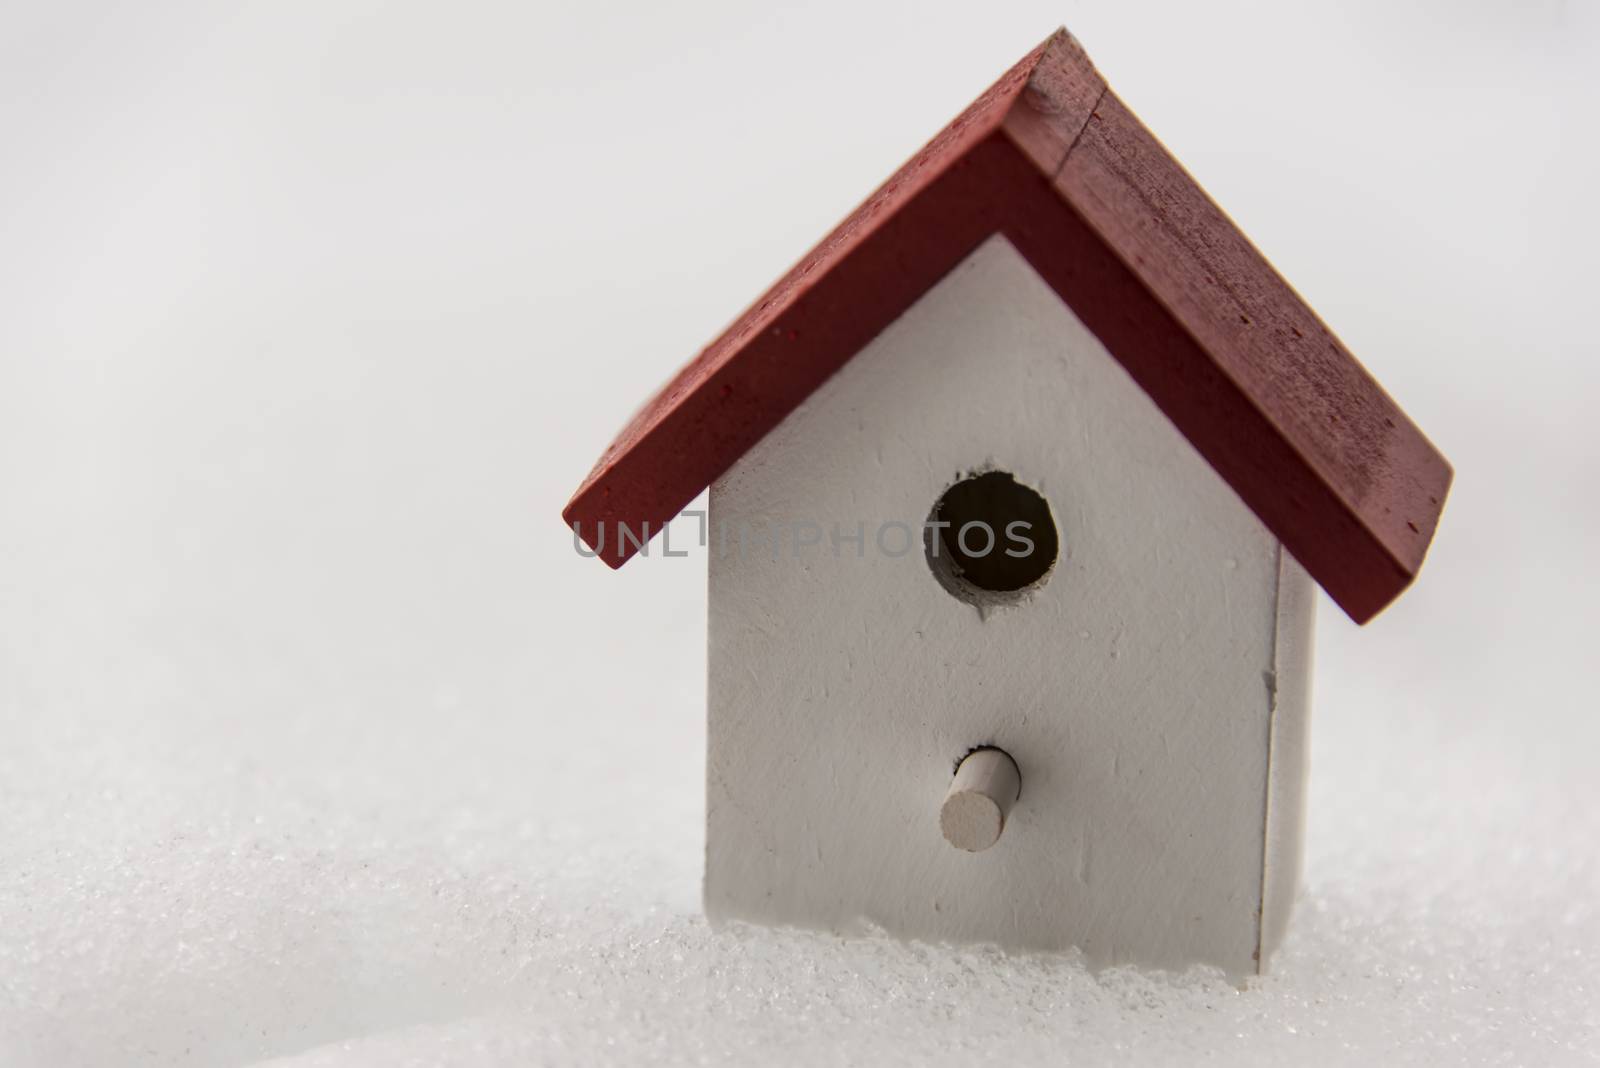 A small wooden bird house in red and white in the snow